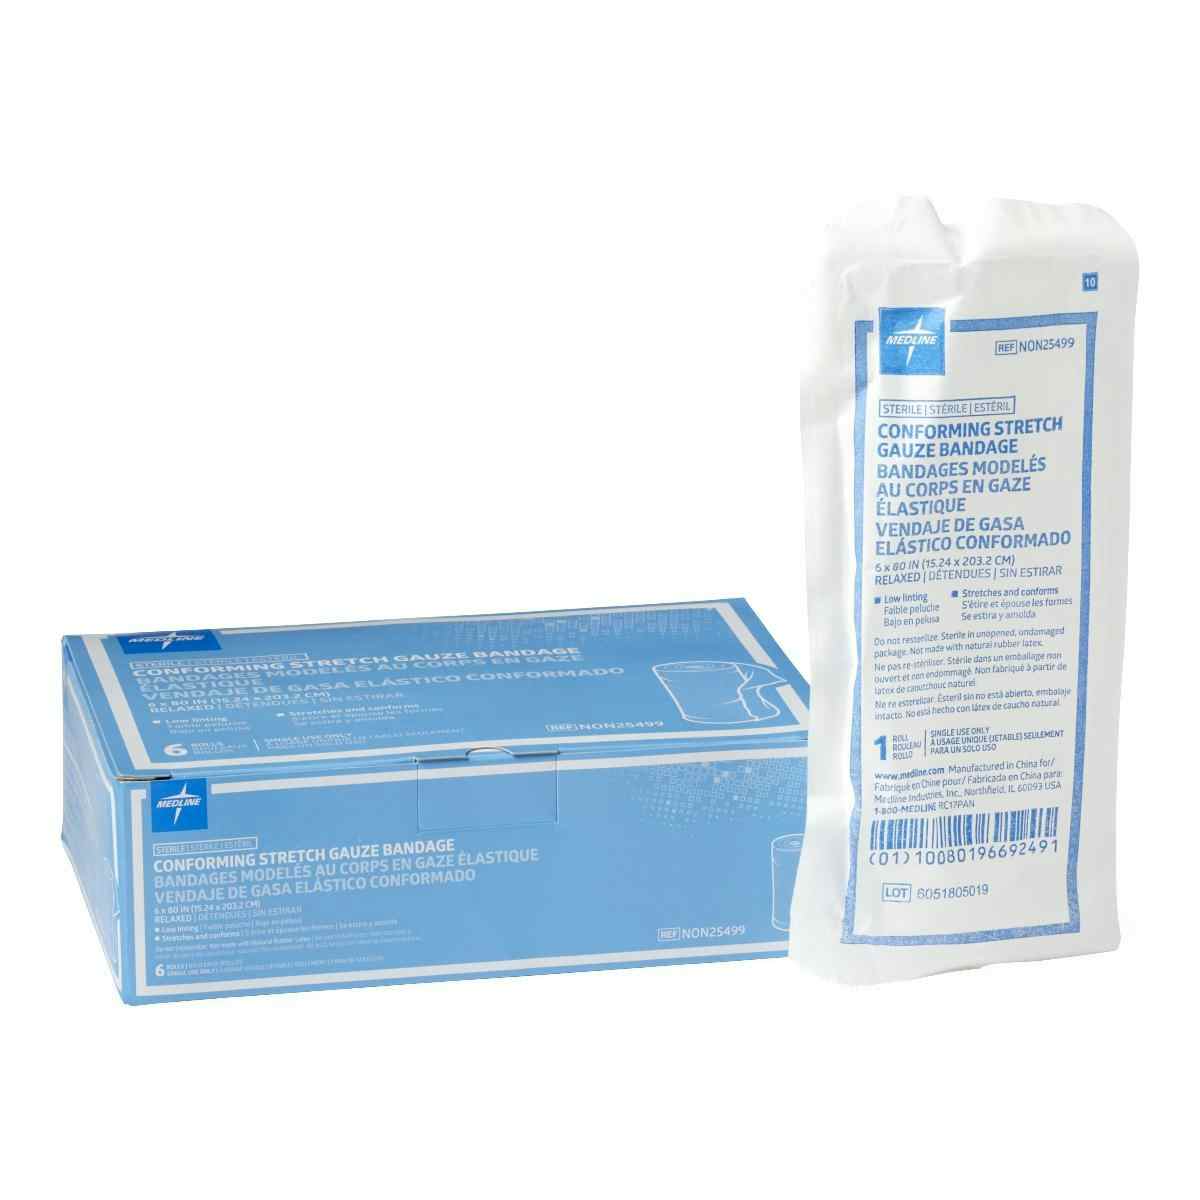 Medline Conforming Stretch Gauze Bandages, Heavy Weight, NON25499, 6" X 80" - Case of 48